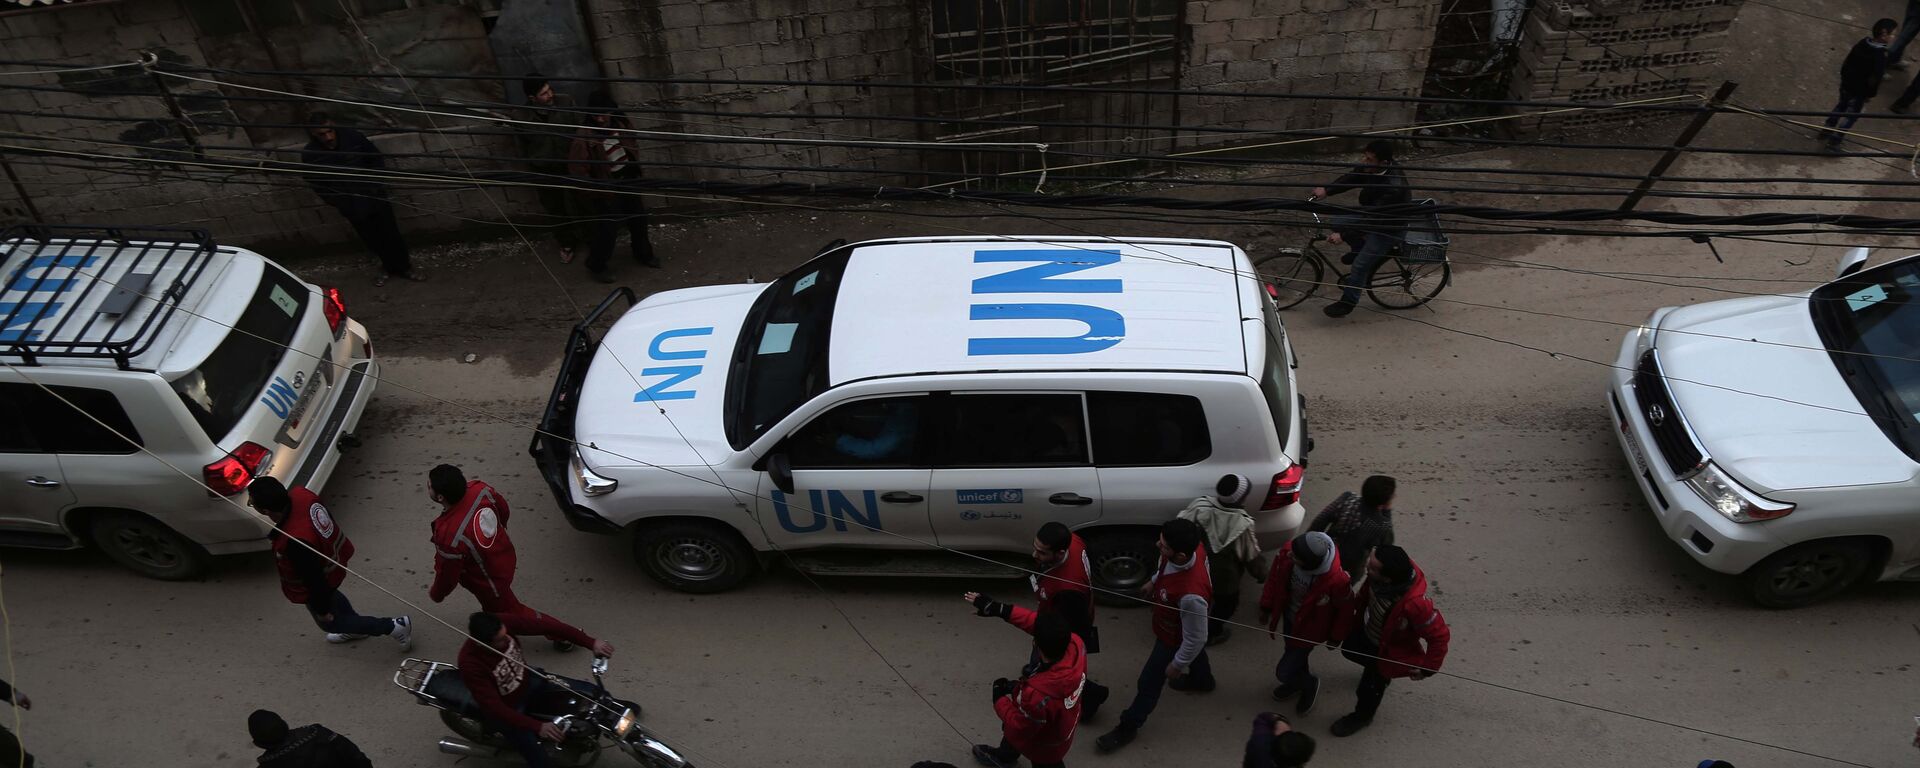 UN vehicles escorting a Red Crescent convoy carrying humanitarian aid arrive in Kafr Batna, in the rebel-held Eastern Ghouta area, on the outskirts of the capital Damascus on February 23, 2016 during an operation in cooperation with the UN to deliver aid to thousands of besieged Syrians. - Sputnik International, 1920, 12.07.2022